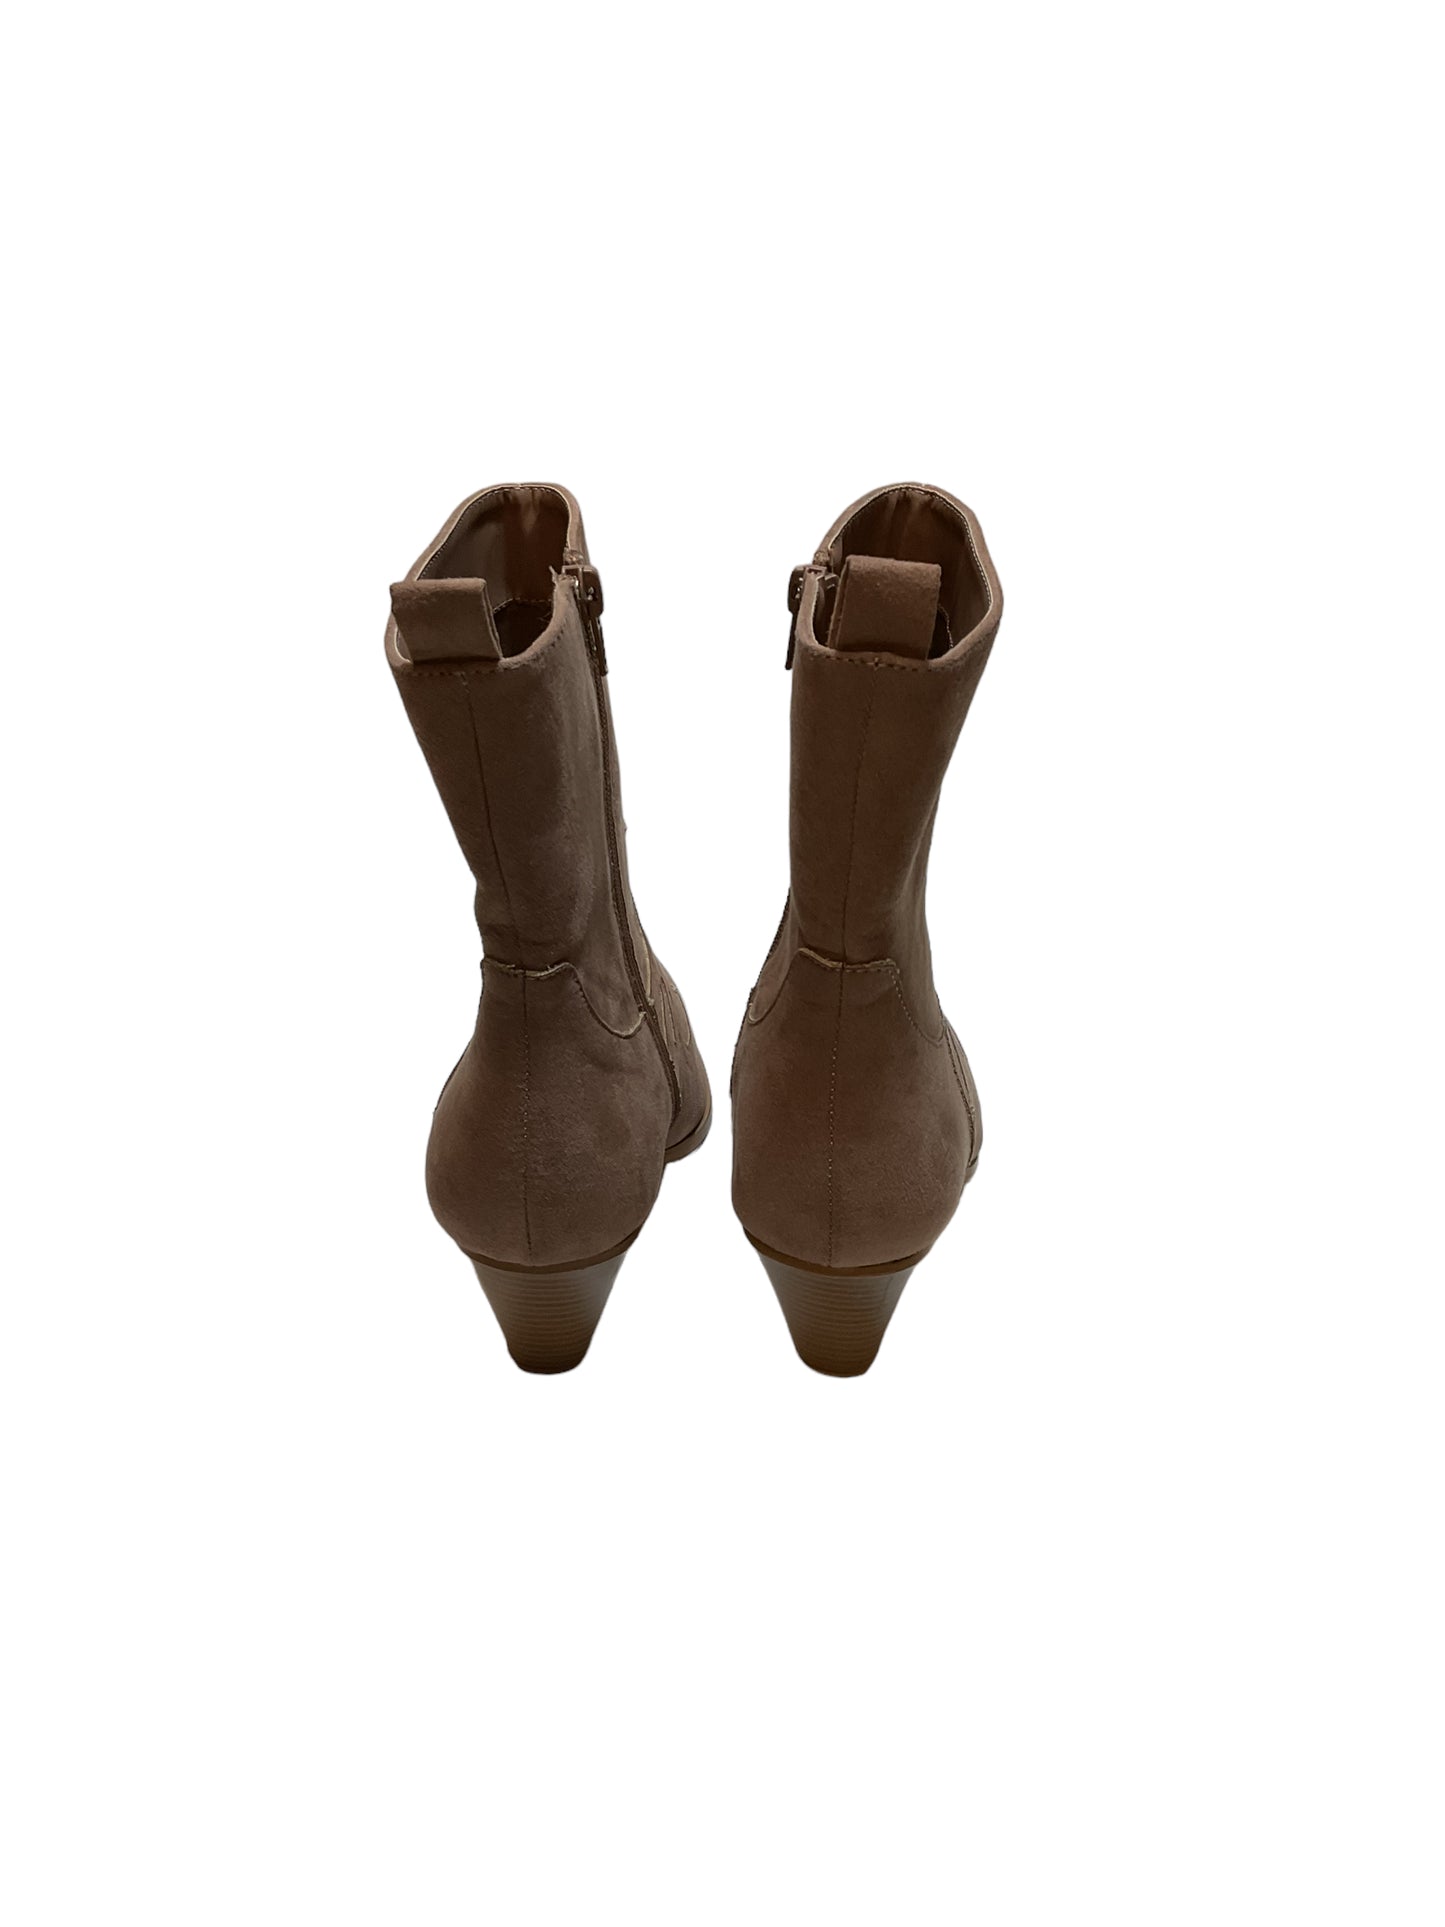 Boots Ankle Heels By Qupid  Size: 9